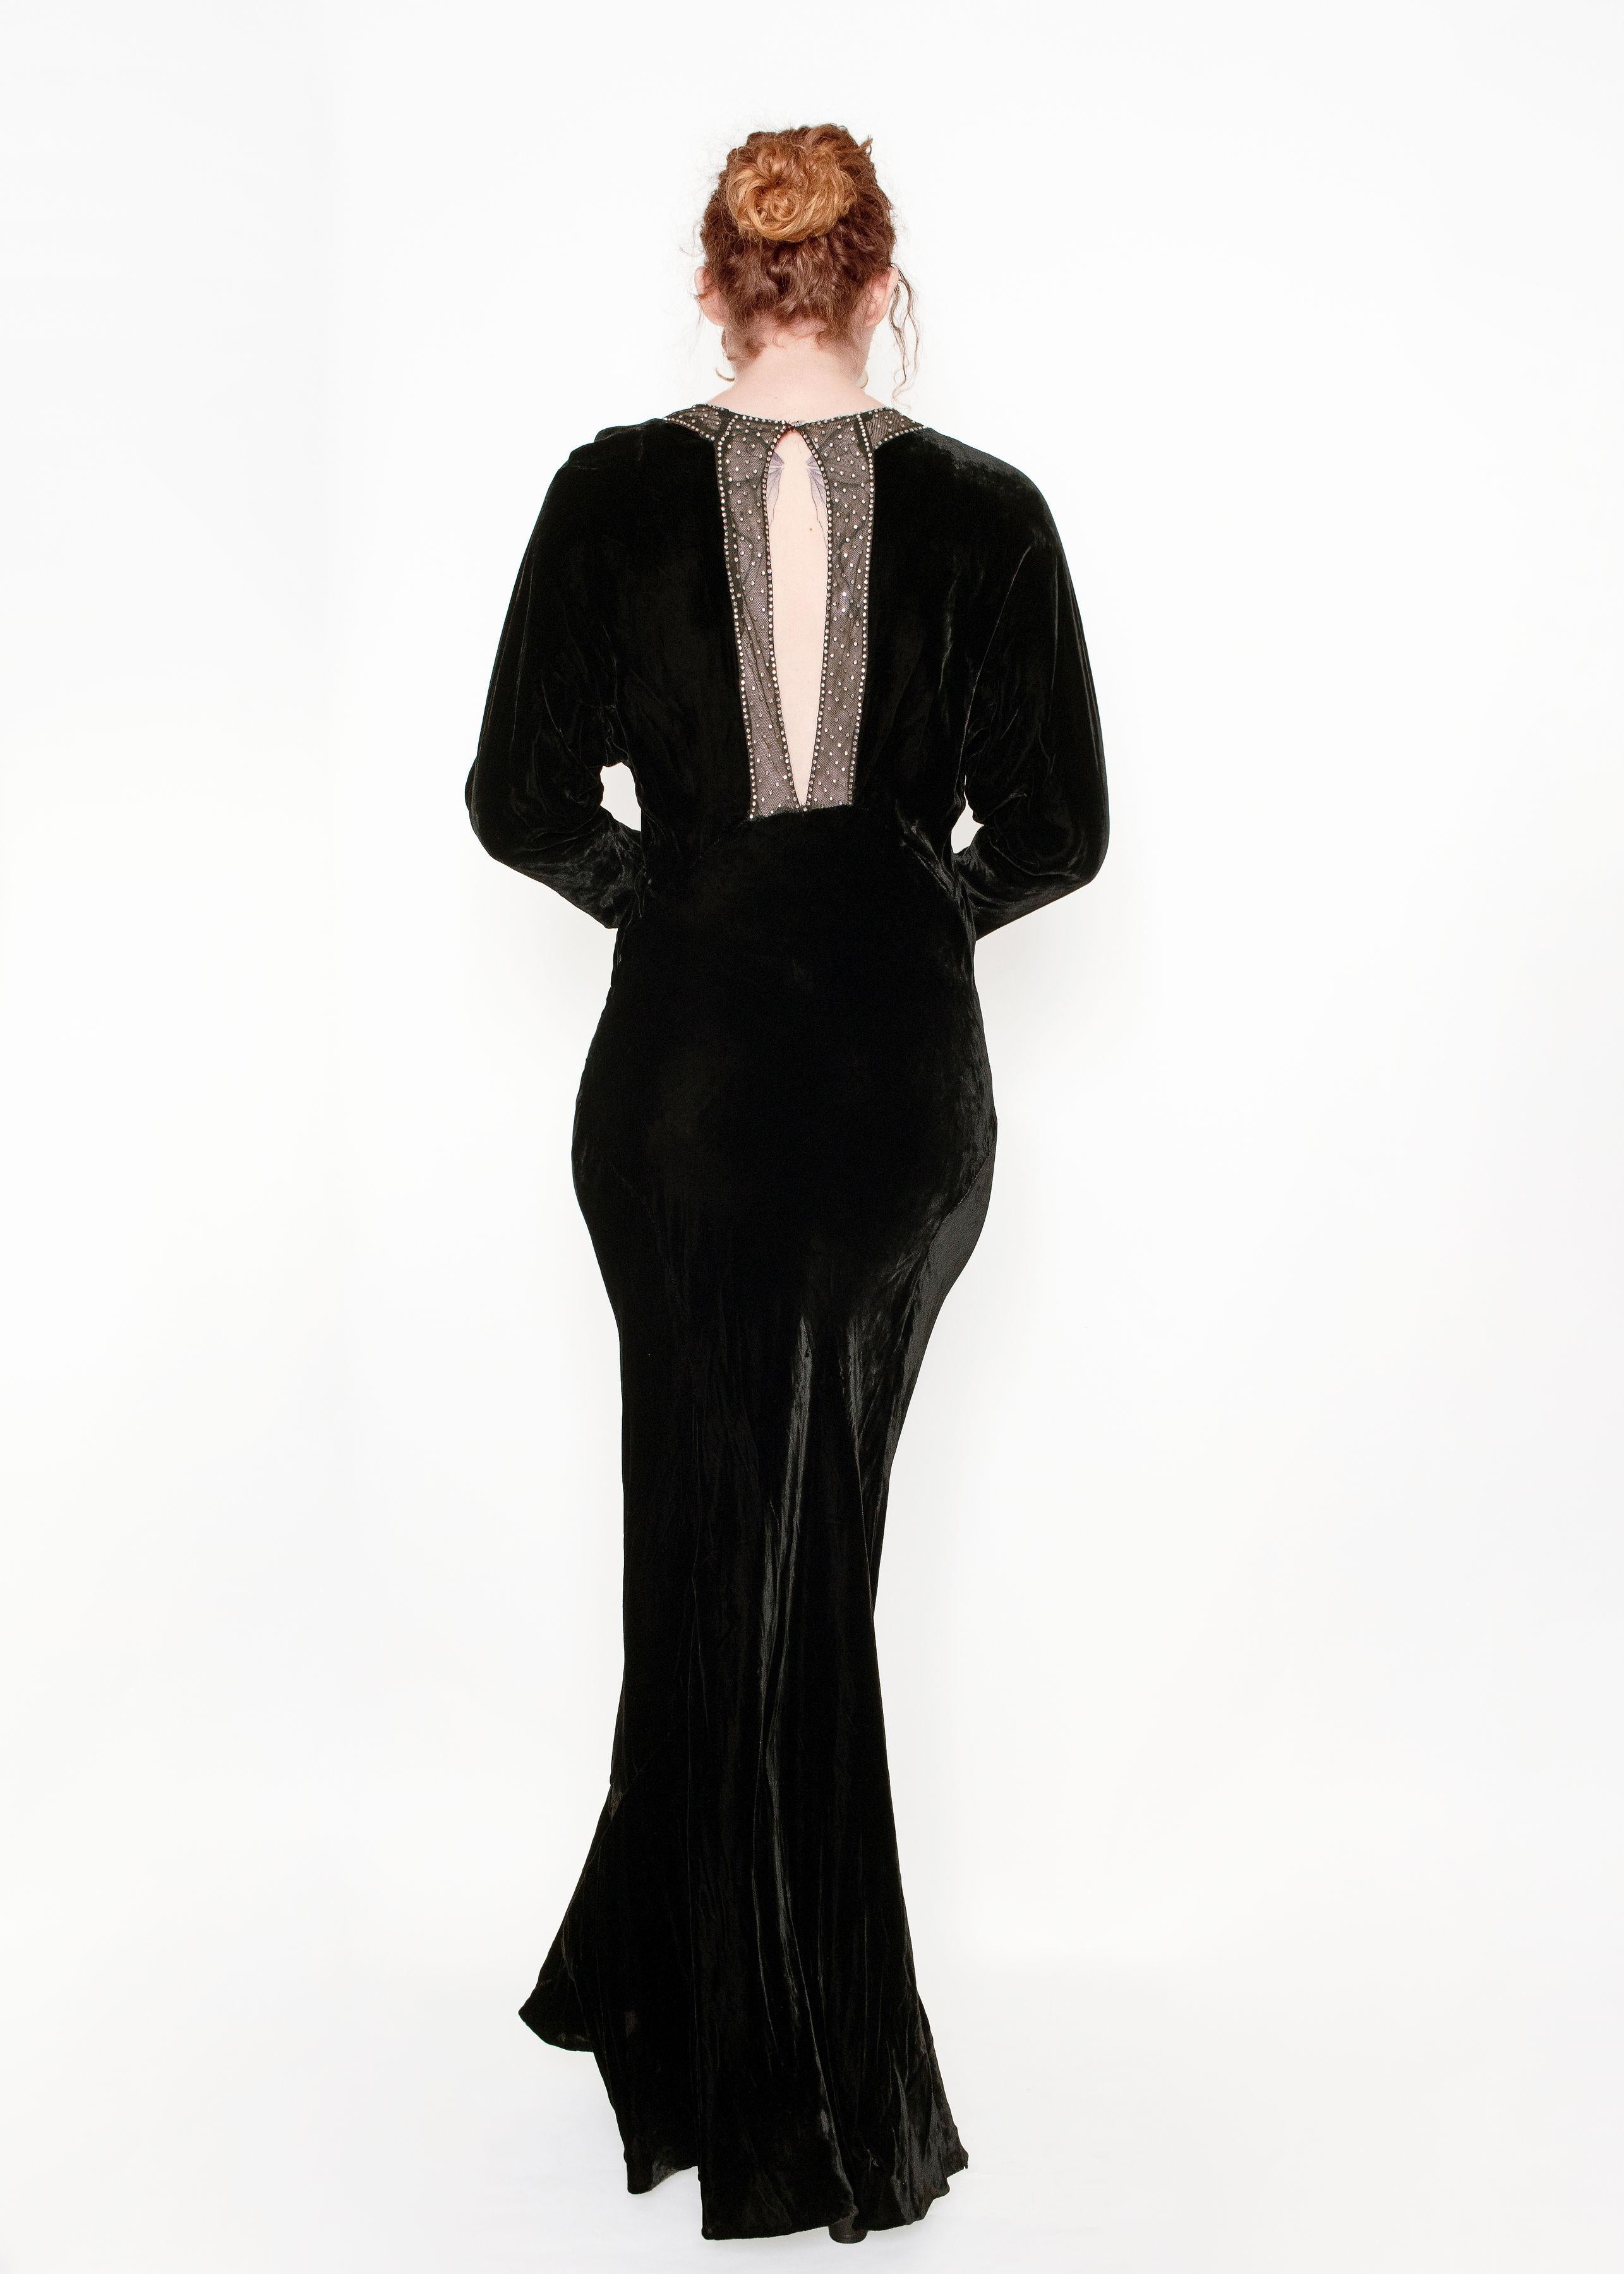 This 1930's velvet & rhinestone gown exudes sophistication, with its sheer chest featuring crystal detailing and full length sleeve with velvet buttons. The keyhold back opening and silhouette creates an elegant and timeless look. Perfect for any